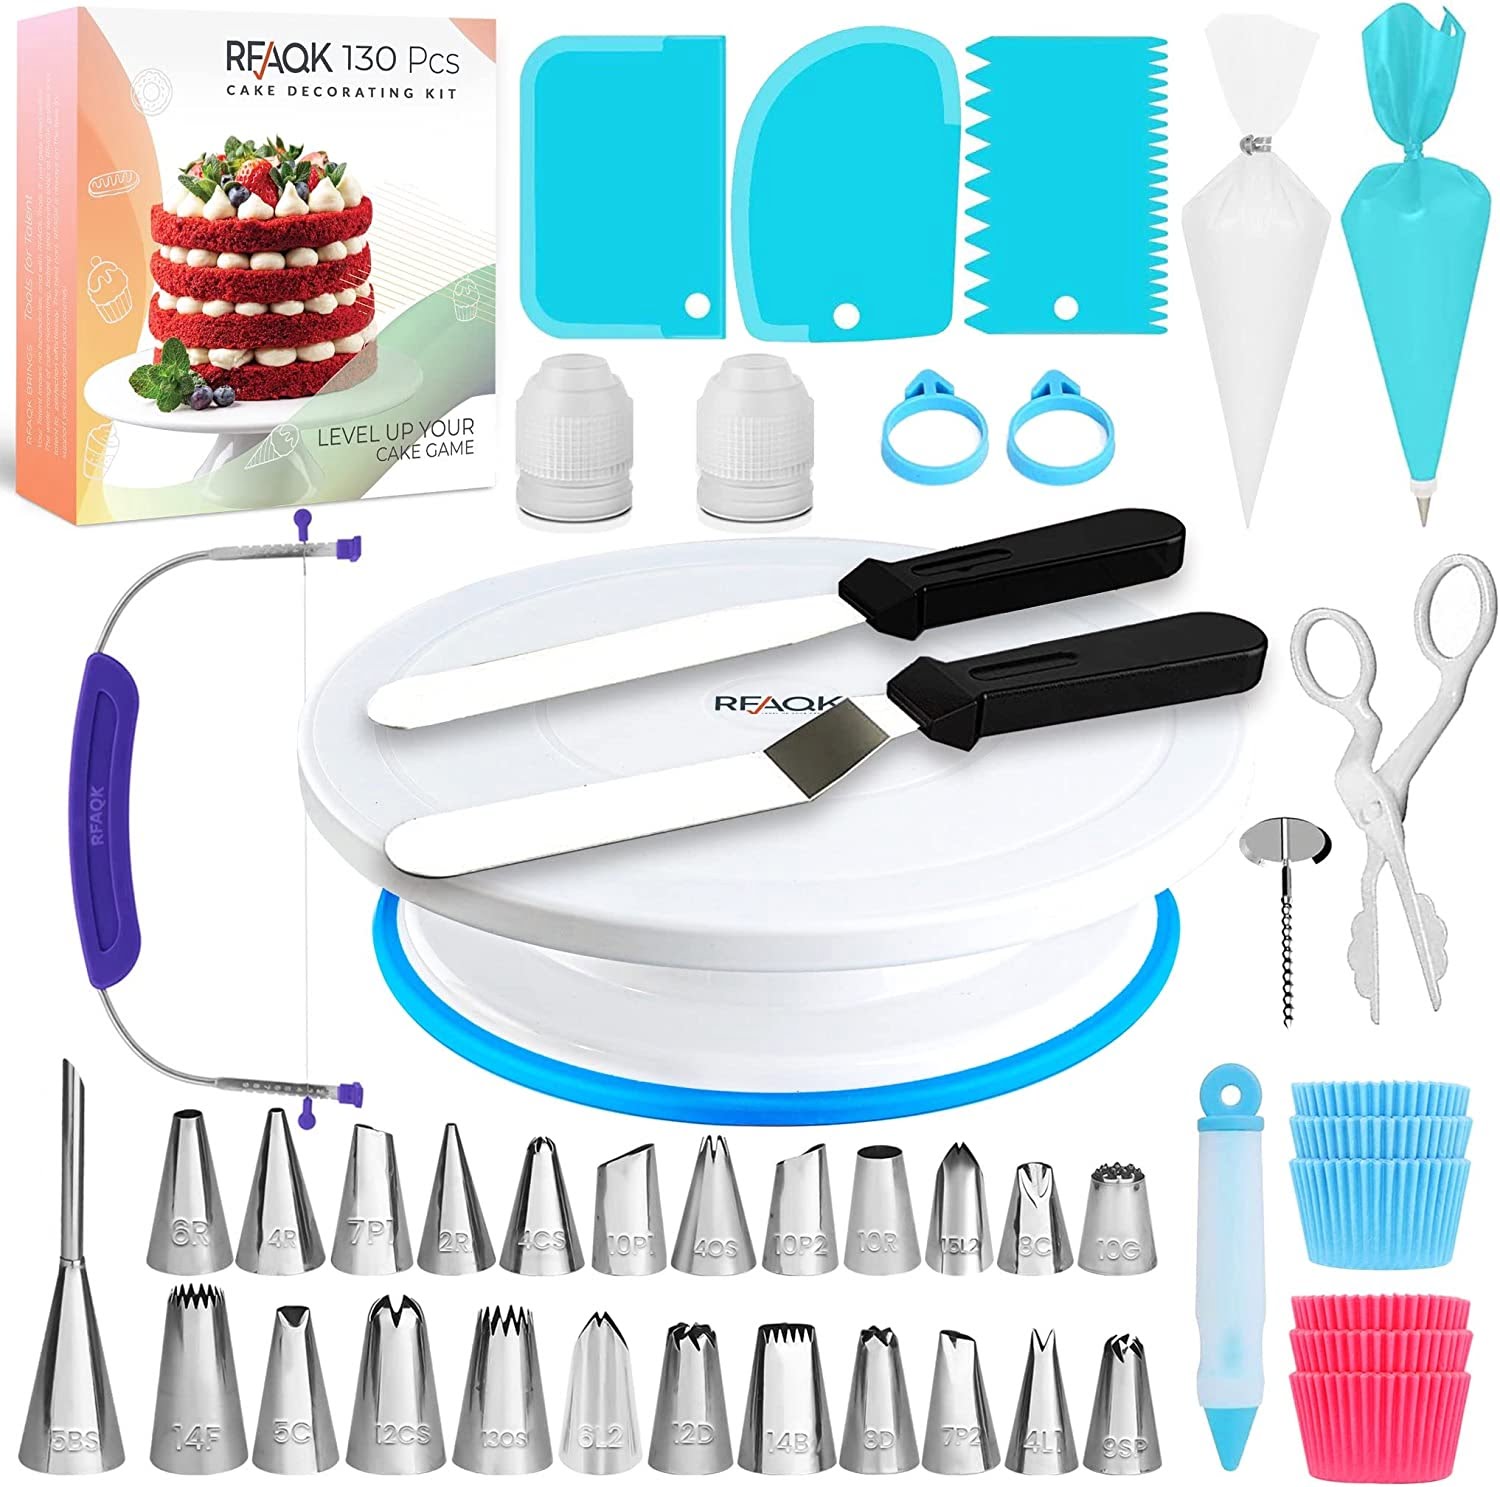 Cake Decorating Supplies Kit - Baking and Piping Set | 194 Pieces |  Leveler, Rotating Turntable Stand, Frosting Bags and Tips, Decoration  Tools, Starter Guide | Cake decorating kits, Cake decorating supplies,  Baking kit